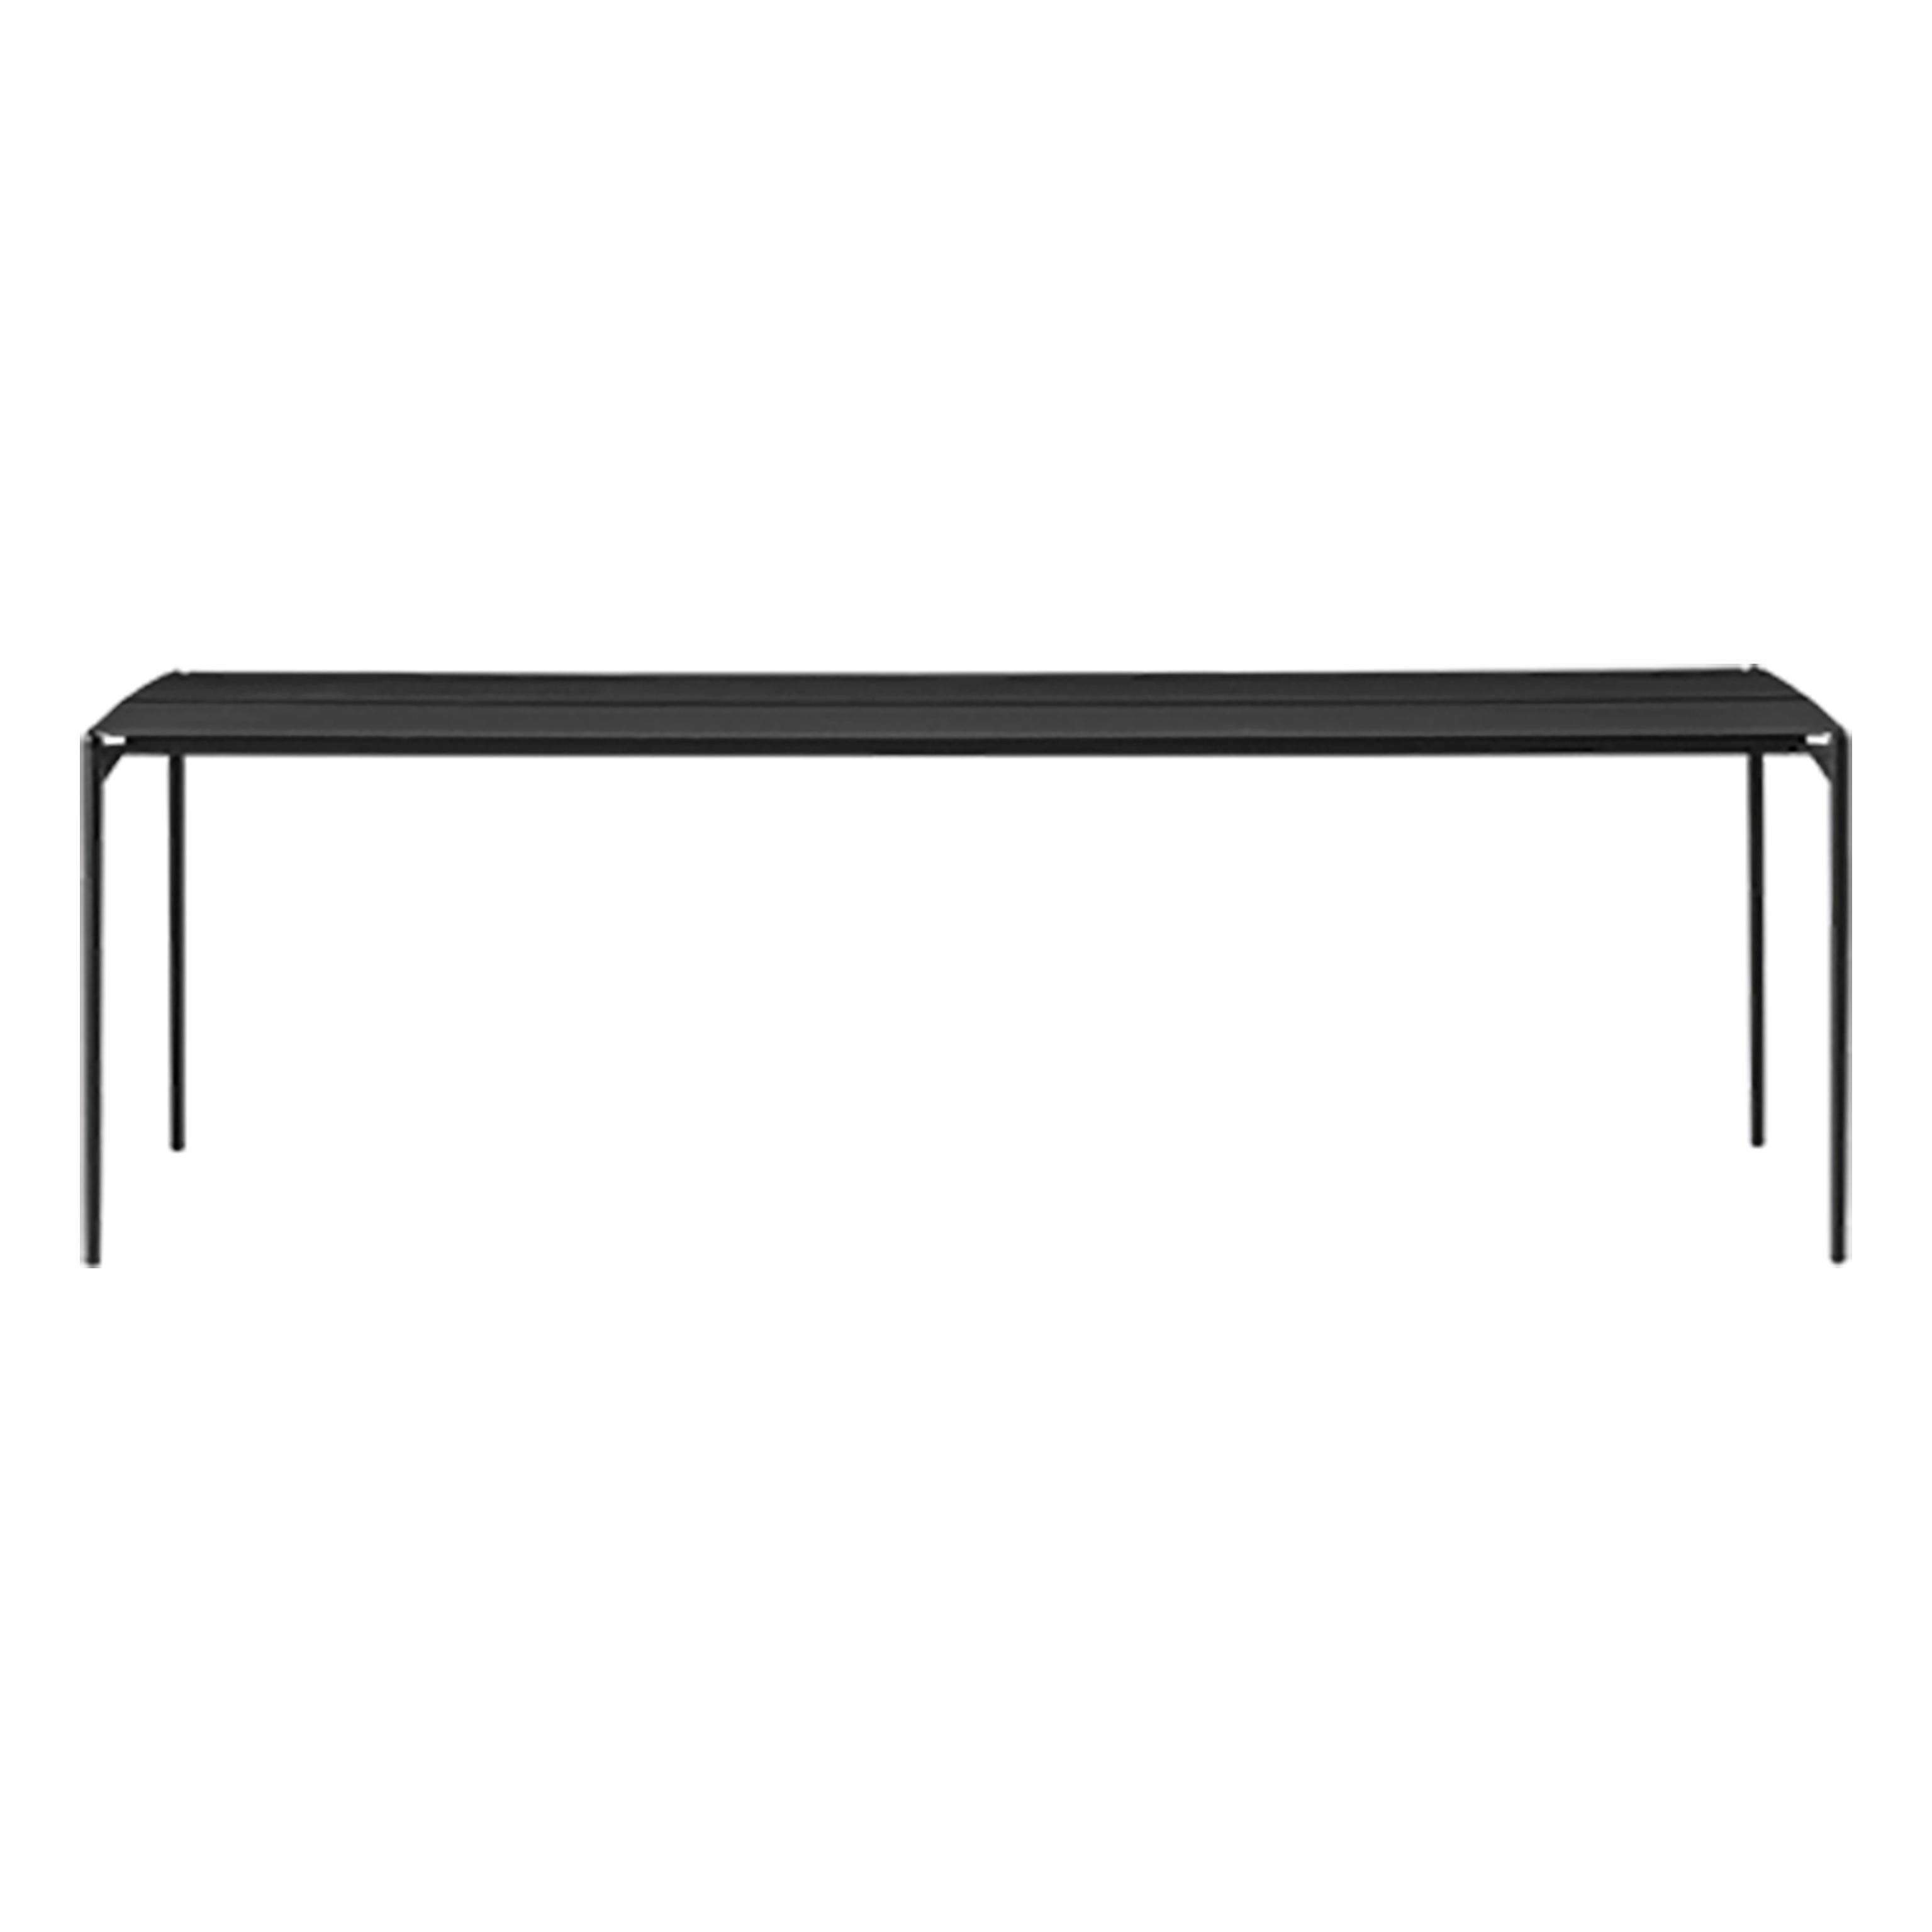 Large Black Minimalist table
Dimensions: D 240 x W 90 x H 72 cm 
Materials: Steel w. Matte Powder Coating & Aluminum w. Matte Powder Coating.
Available in colors: Taupe, Bordeaux, Forest, Ginger Bread, Black and, Black and Gold.


Bring elegance